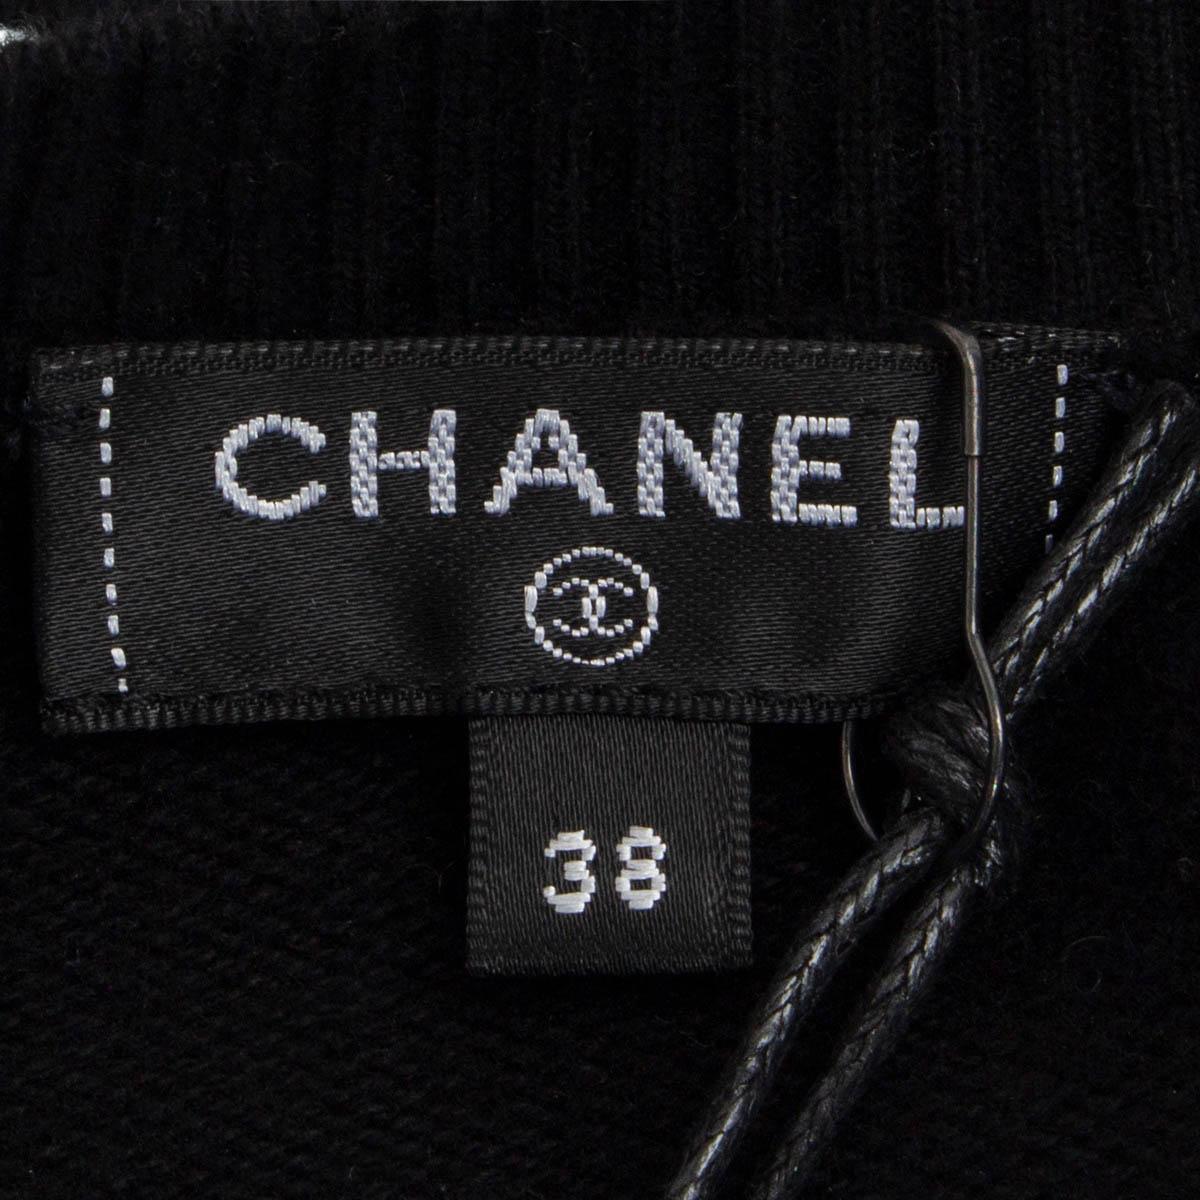 CHANEL black cotton 2017 STUDDED & GLITTER Crewneck Sweater 38 S For Sale 2